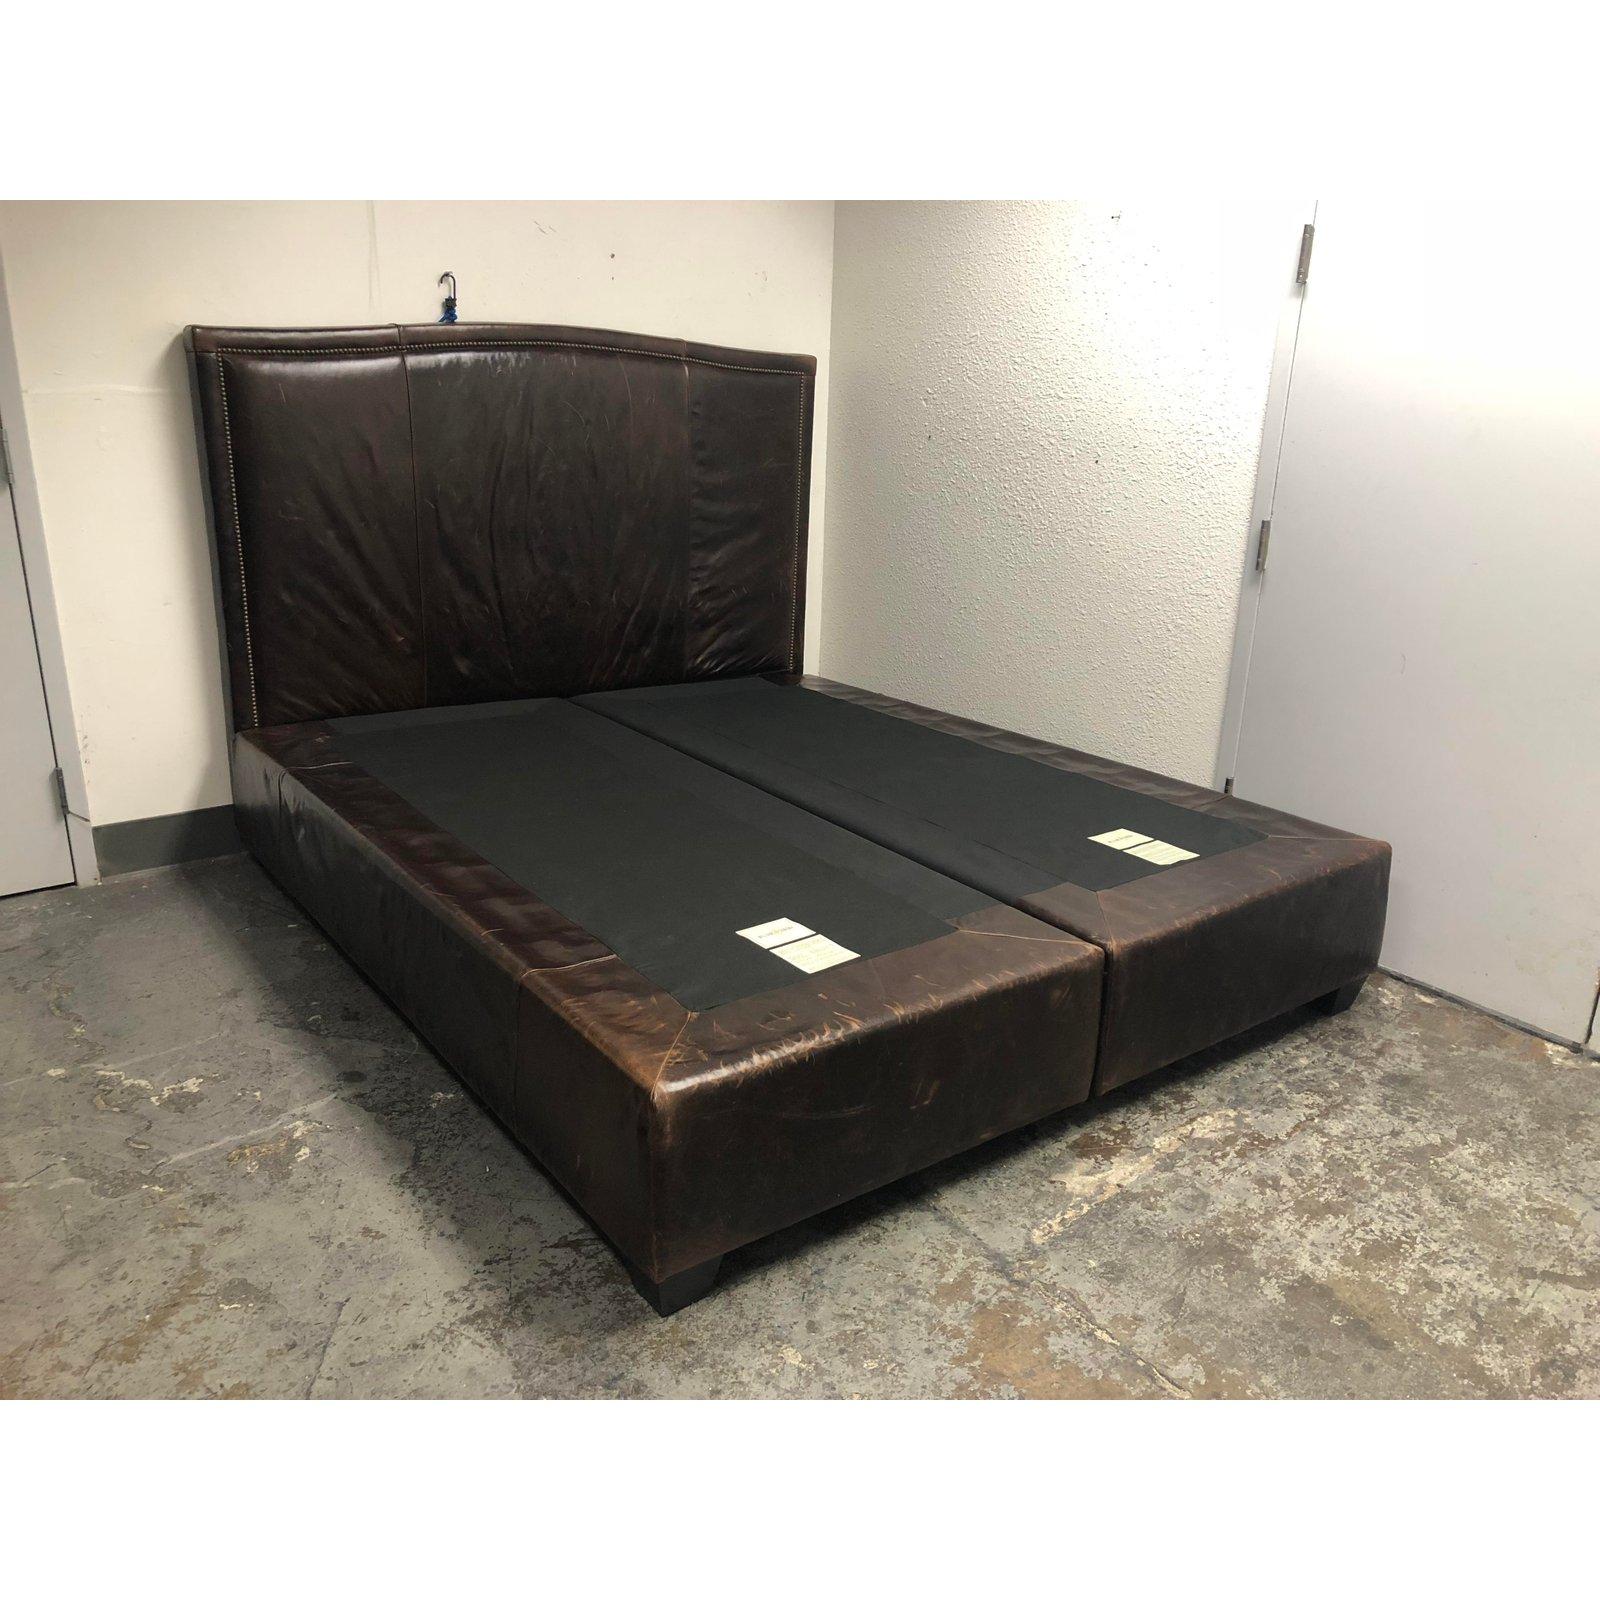 This is a Sutton California king bed frame from the Williams Sonoma home collection. The leather is well worn, adding visible conditions to the distressed style. Severely distressed brown leather, brass pinhead trim, and cal king size make this